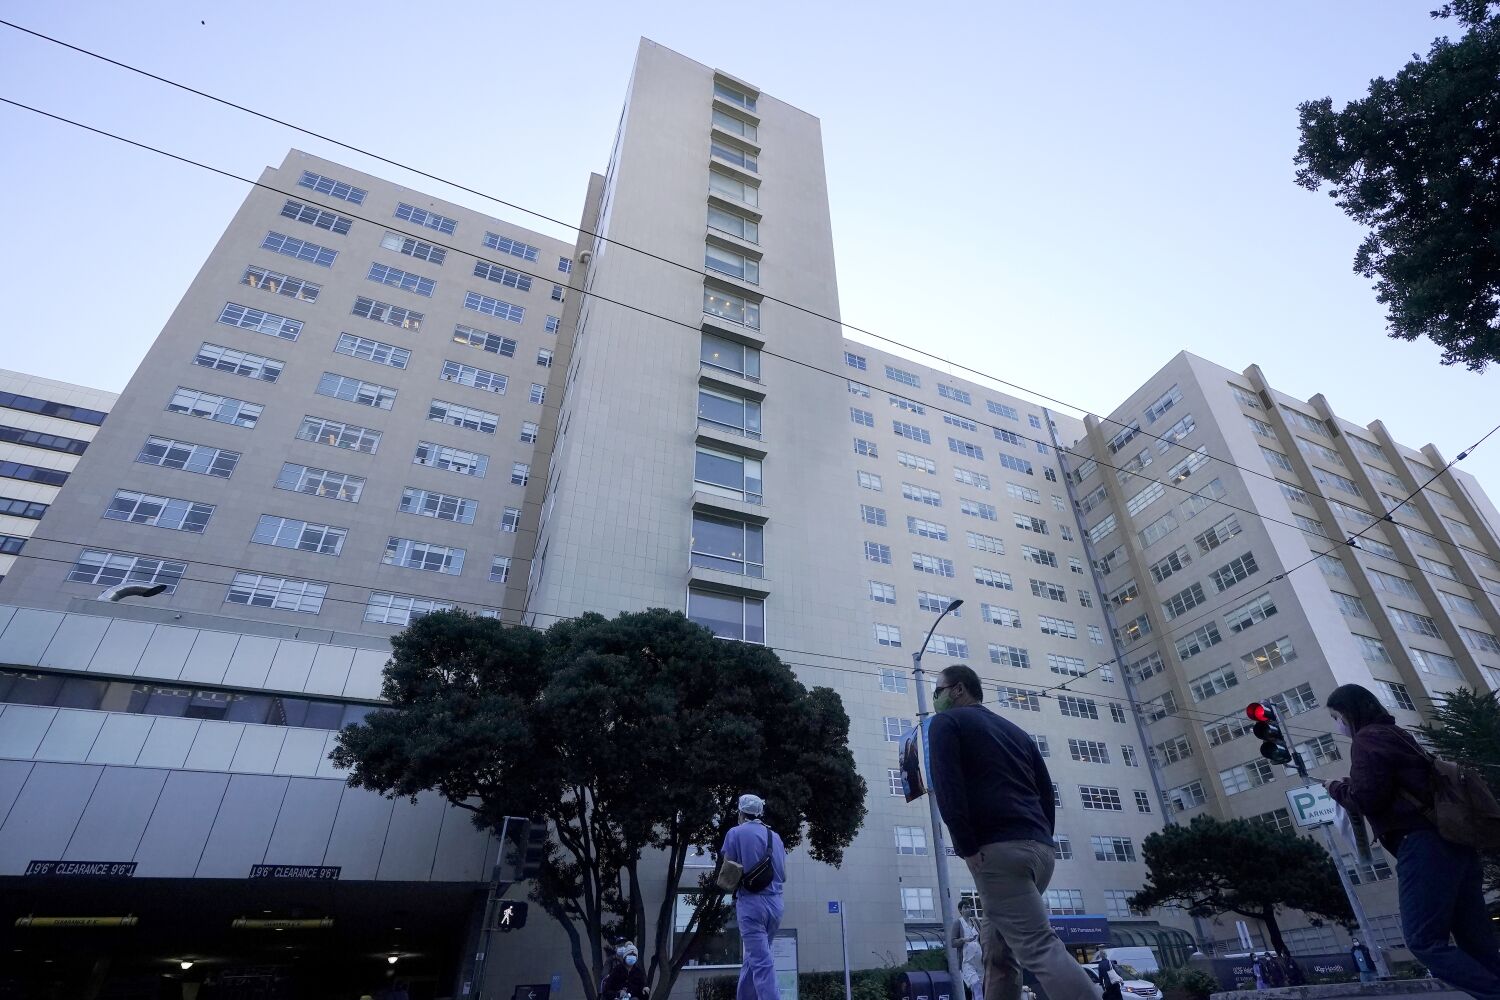 Editorial: Reckoning with UCSF's dark history of unethical medical experiments on inmates